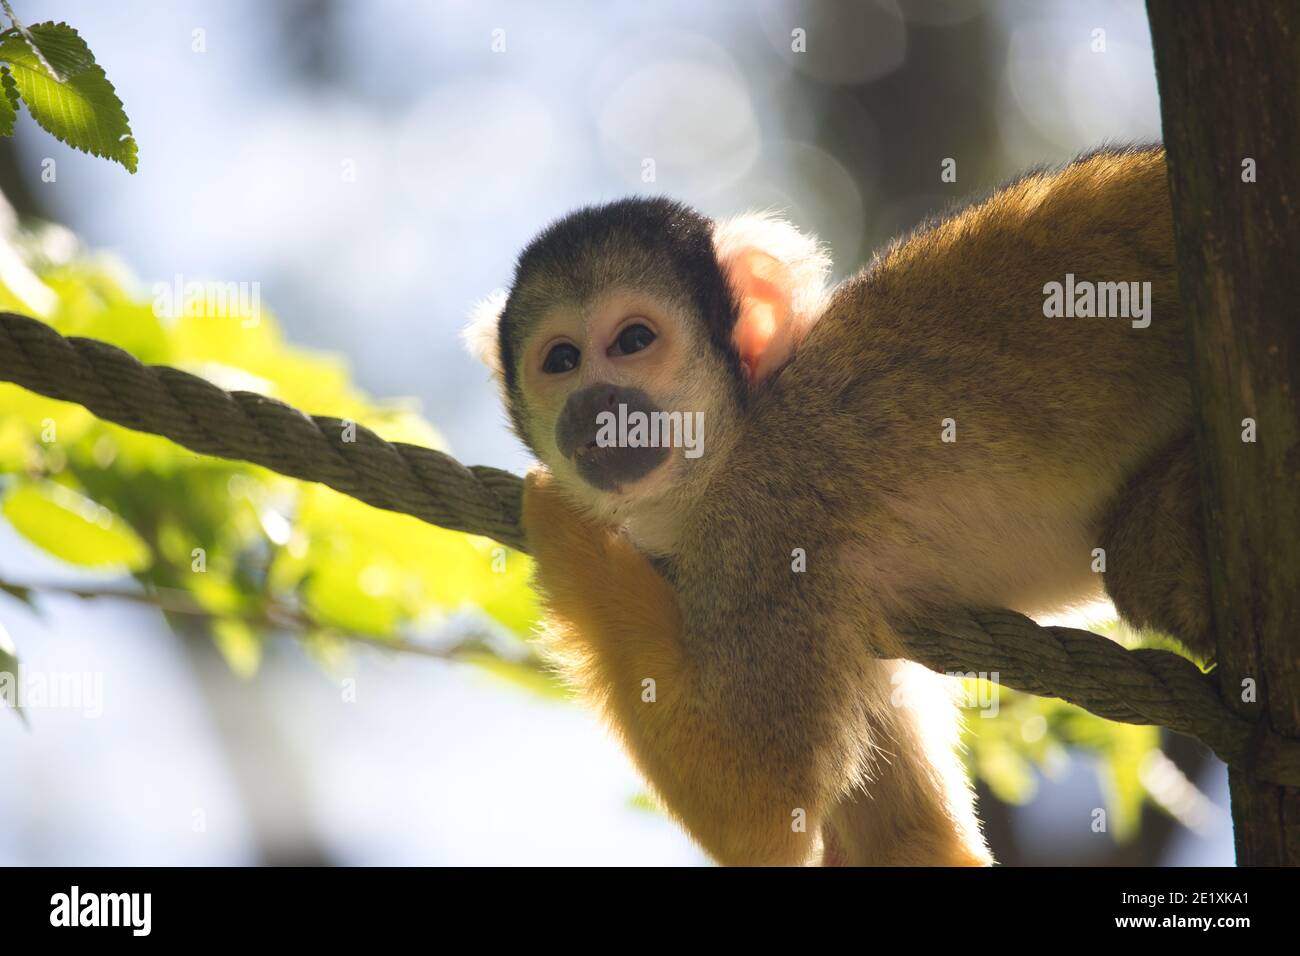 Squirrel monkeys are lively little creatures that like to romp in the trees and also sometimes cheekily steal things from people. Stock Photo